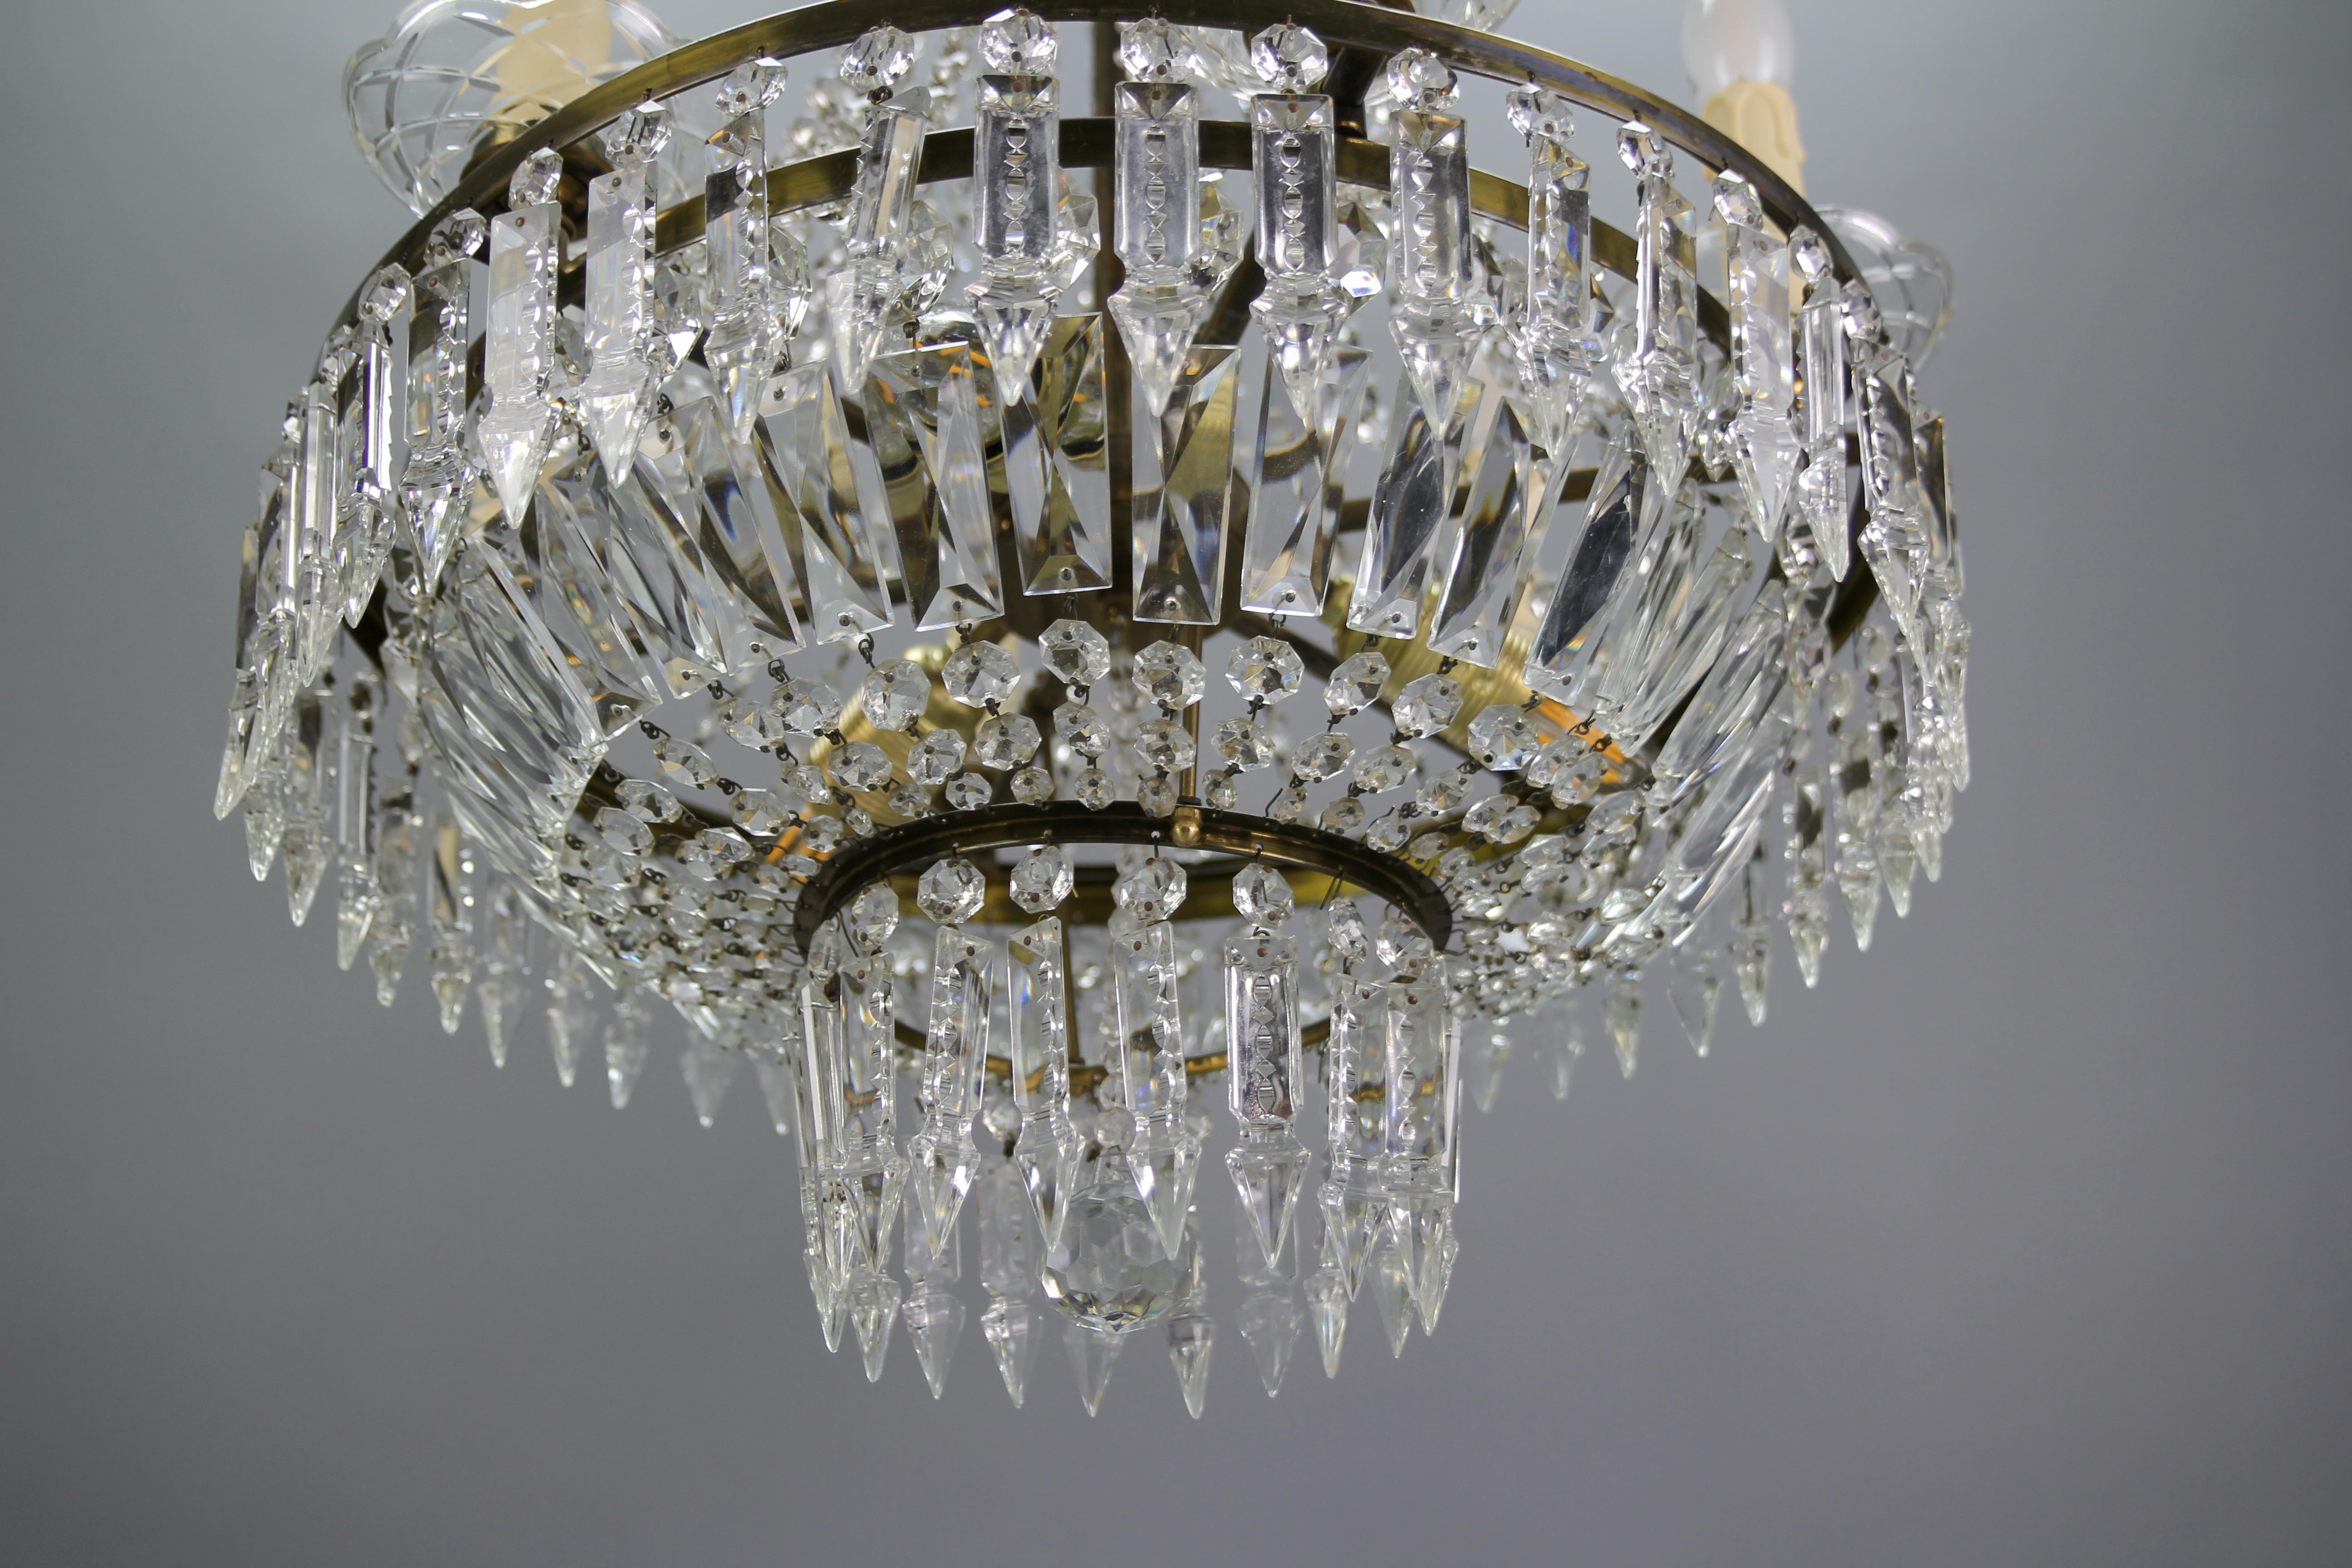 20th Century Art Deco Style Crystal Glass and Brass Nine-Light Basket Chandelier For Sale